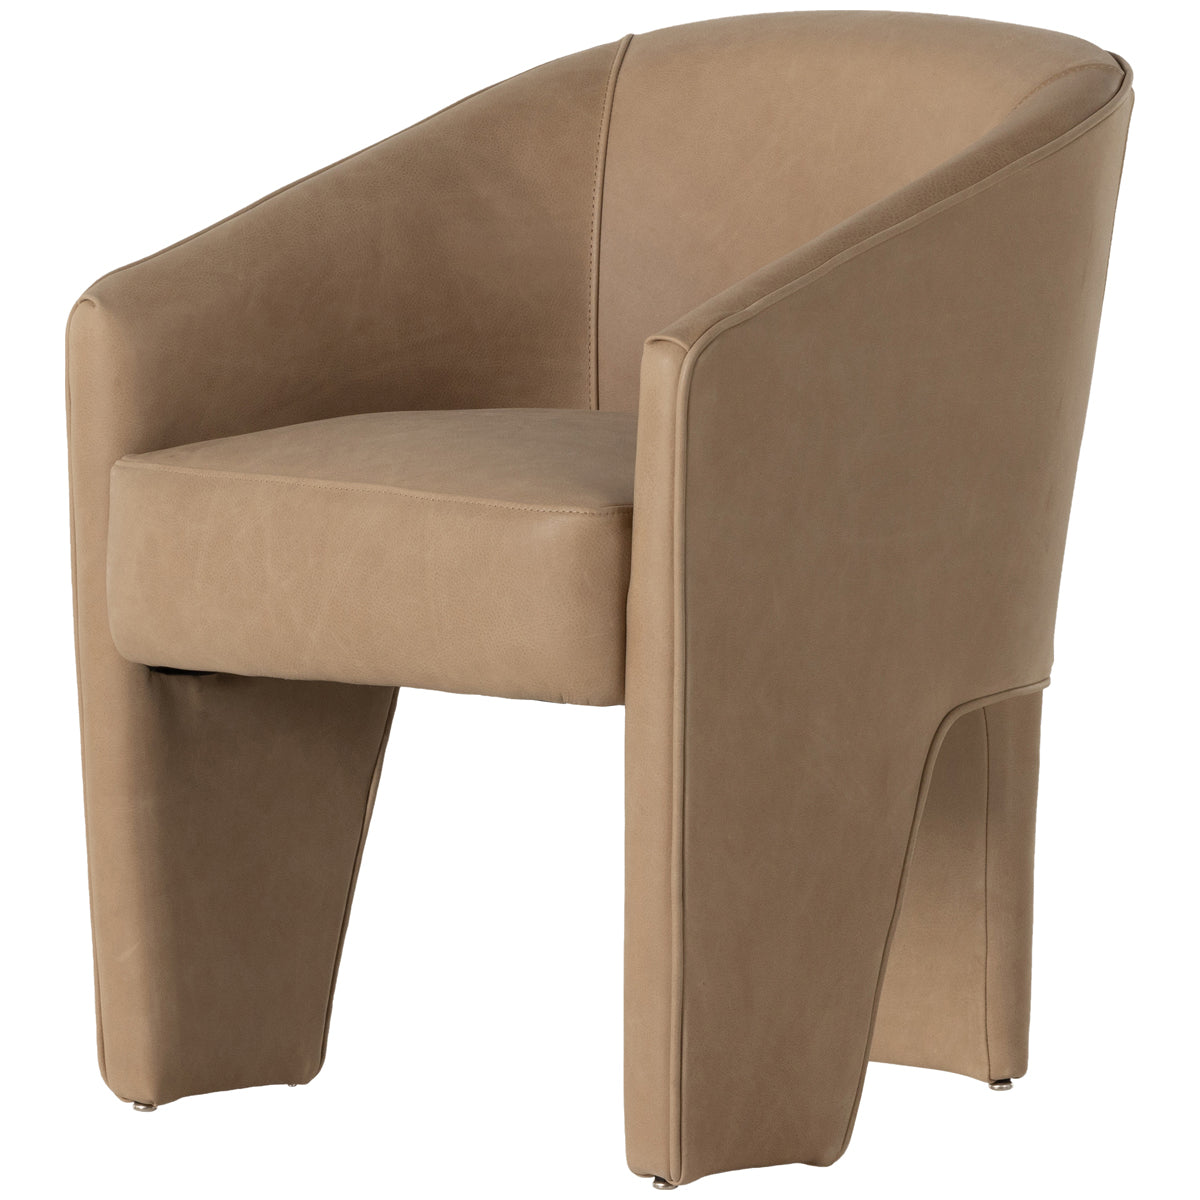 Four Hands Grayson Fae Dining Chair